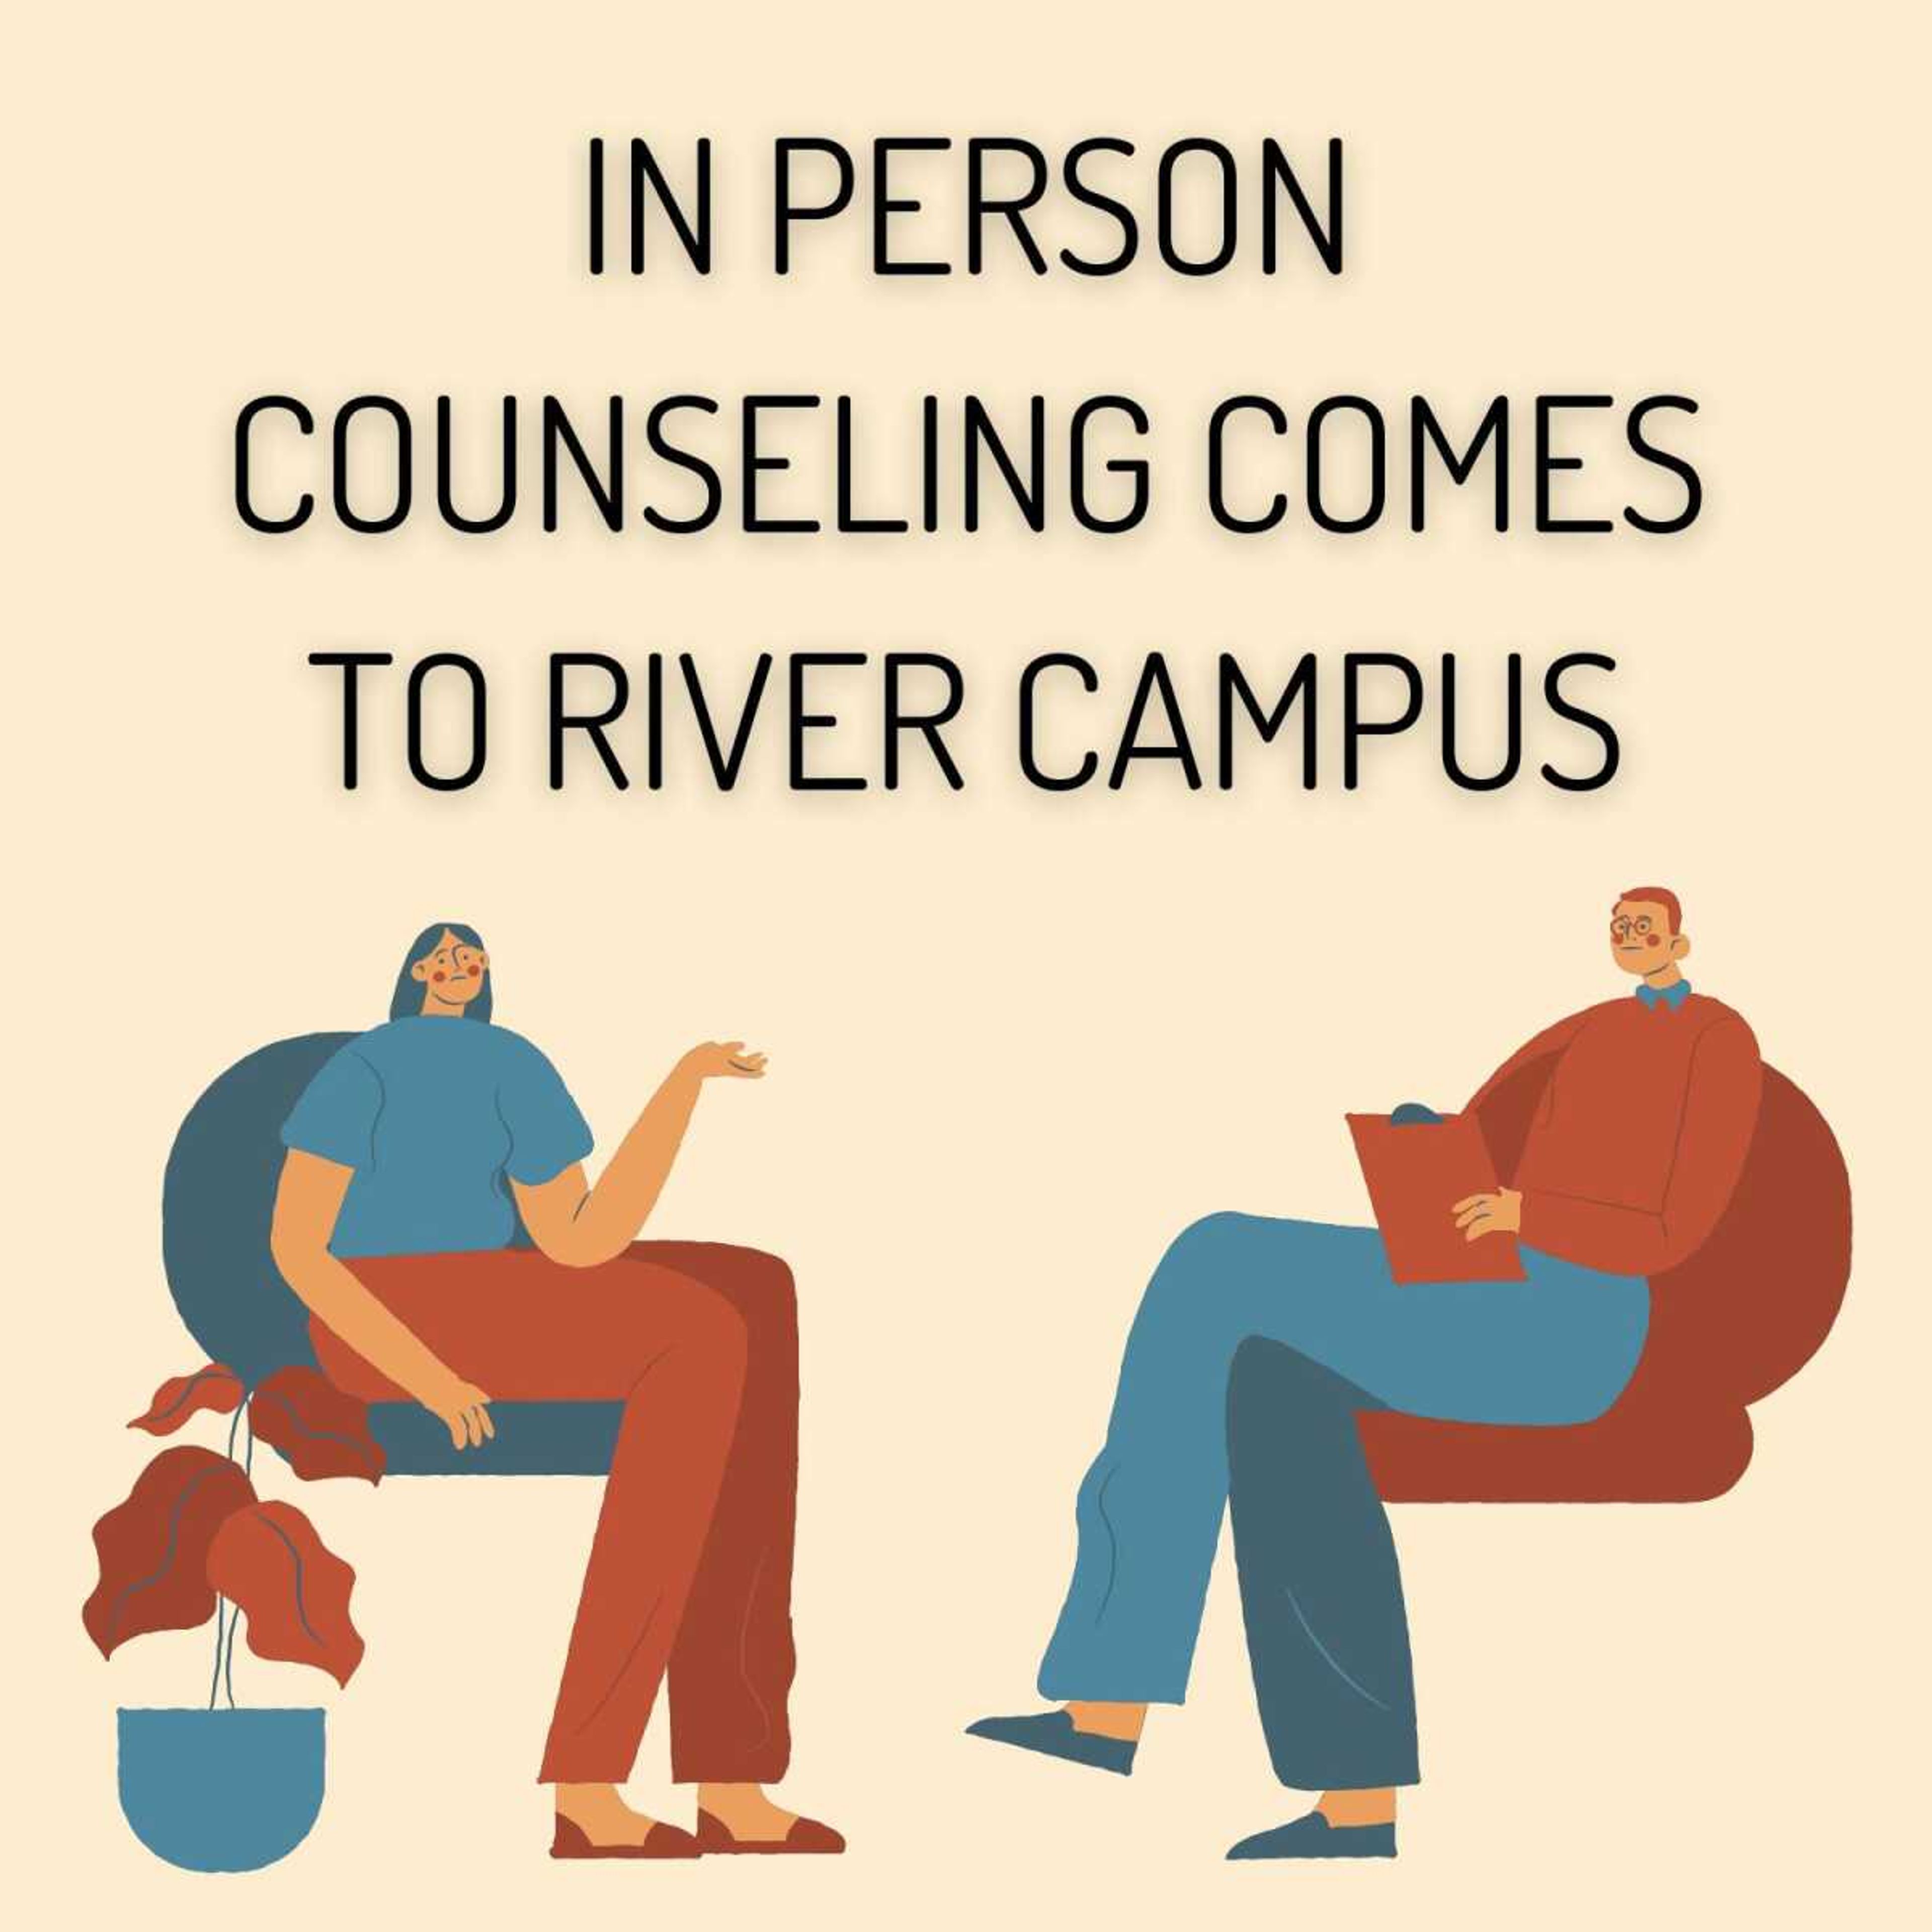 In person counseling comes to River Campus